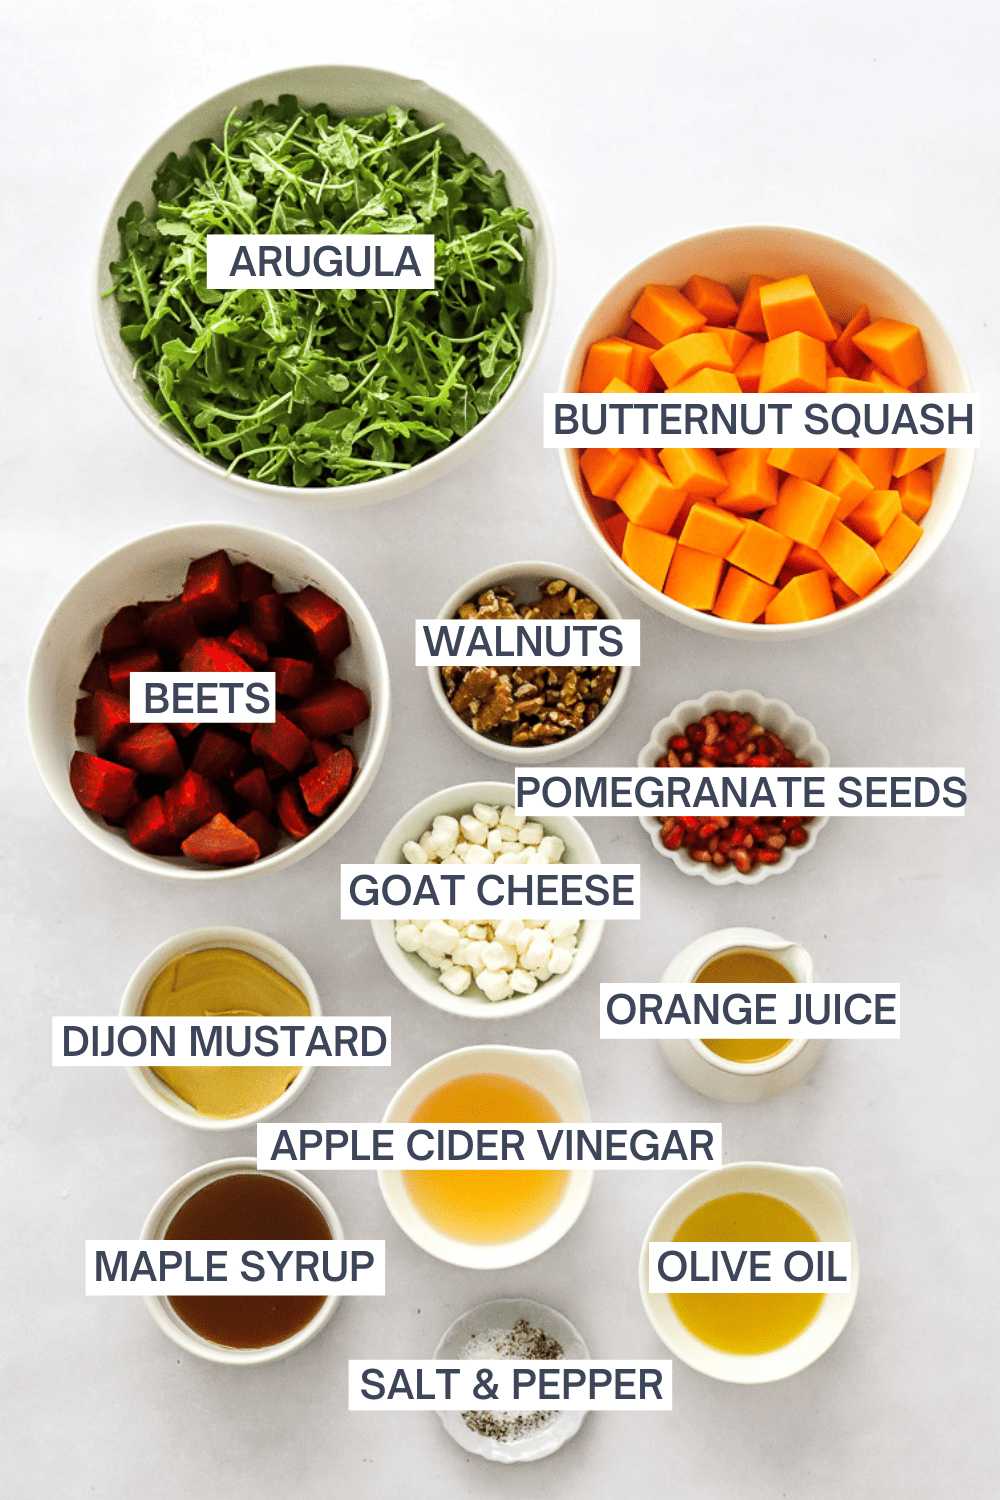 Ingredients for roasted beet and squash salad in bowls with labels over each ingredient.